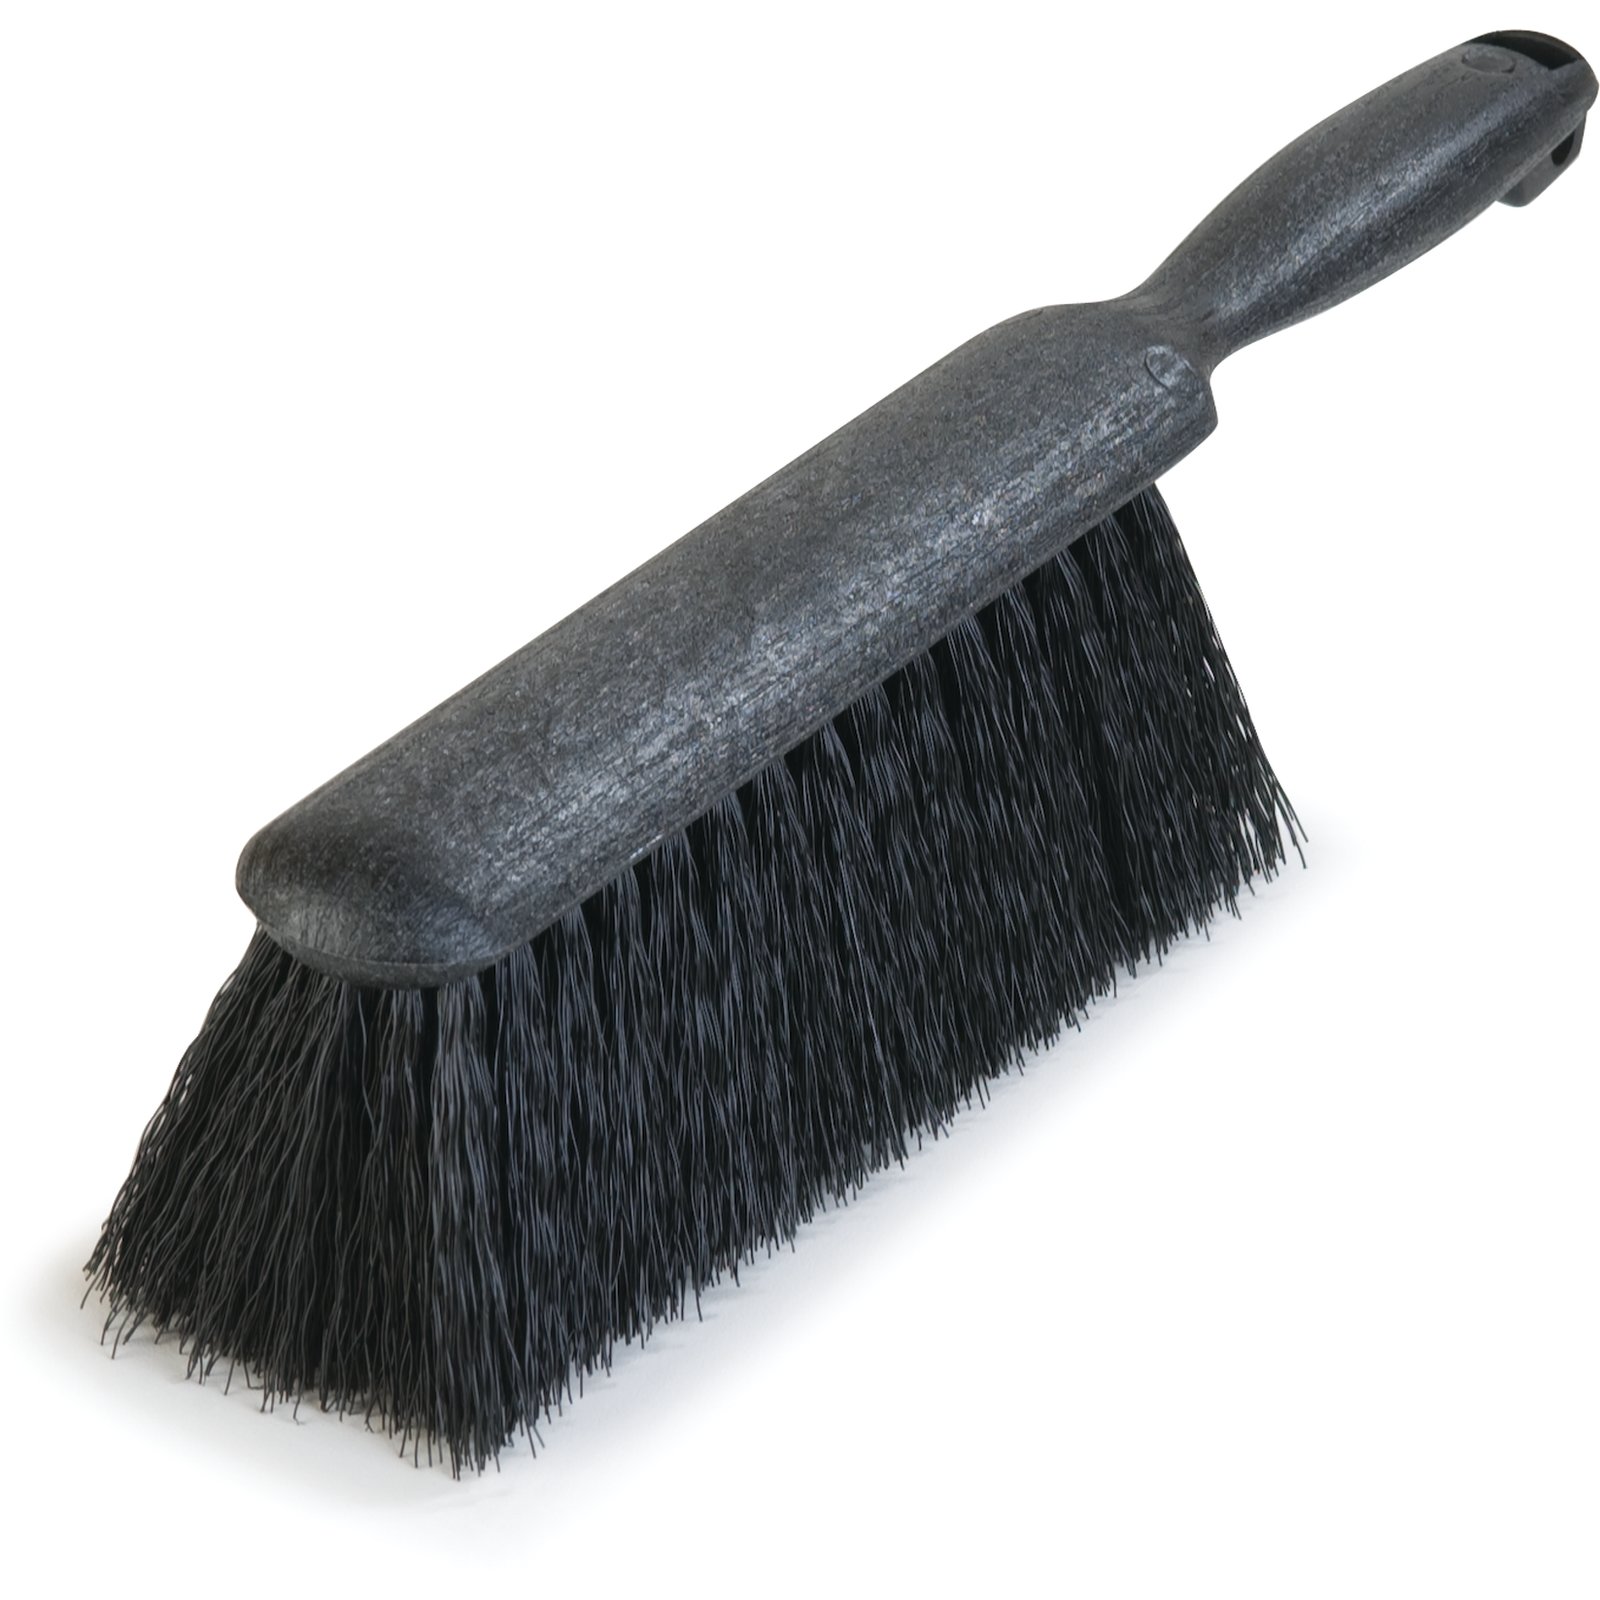 Flo-Pac Counter / Bench Brush with Flagged Polypropylene Bristles - Bunzl  Processor Division